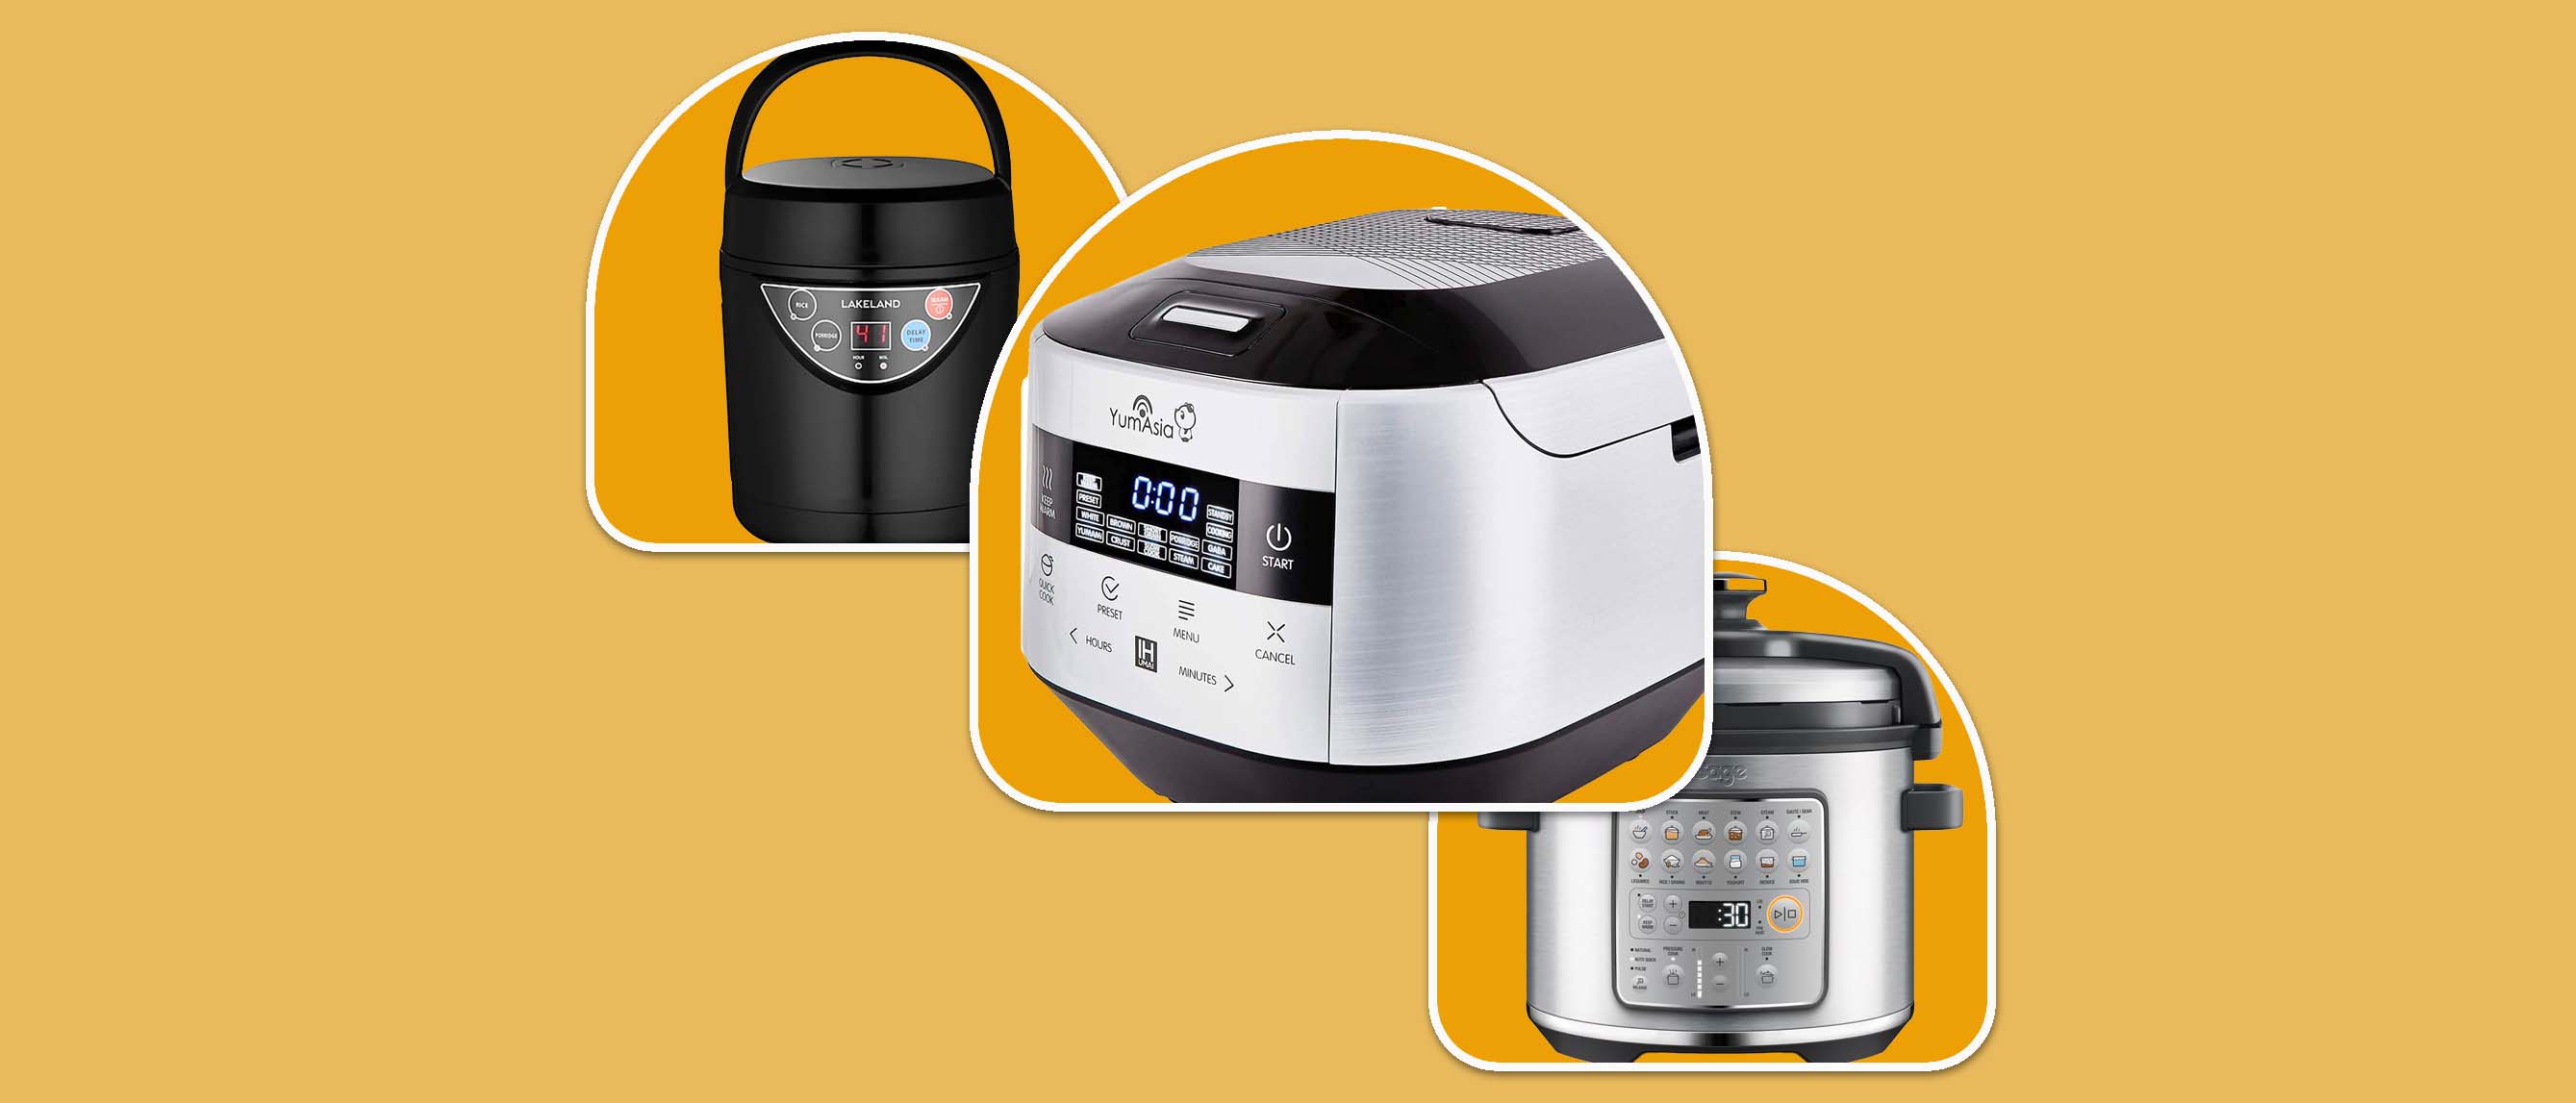 Bamboo IH Rice Cooker Gets Expert Reviews 'Best Multi-Function